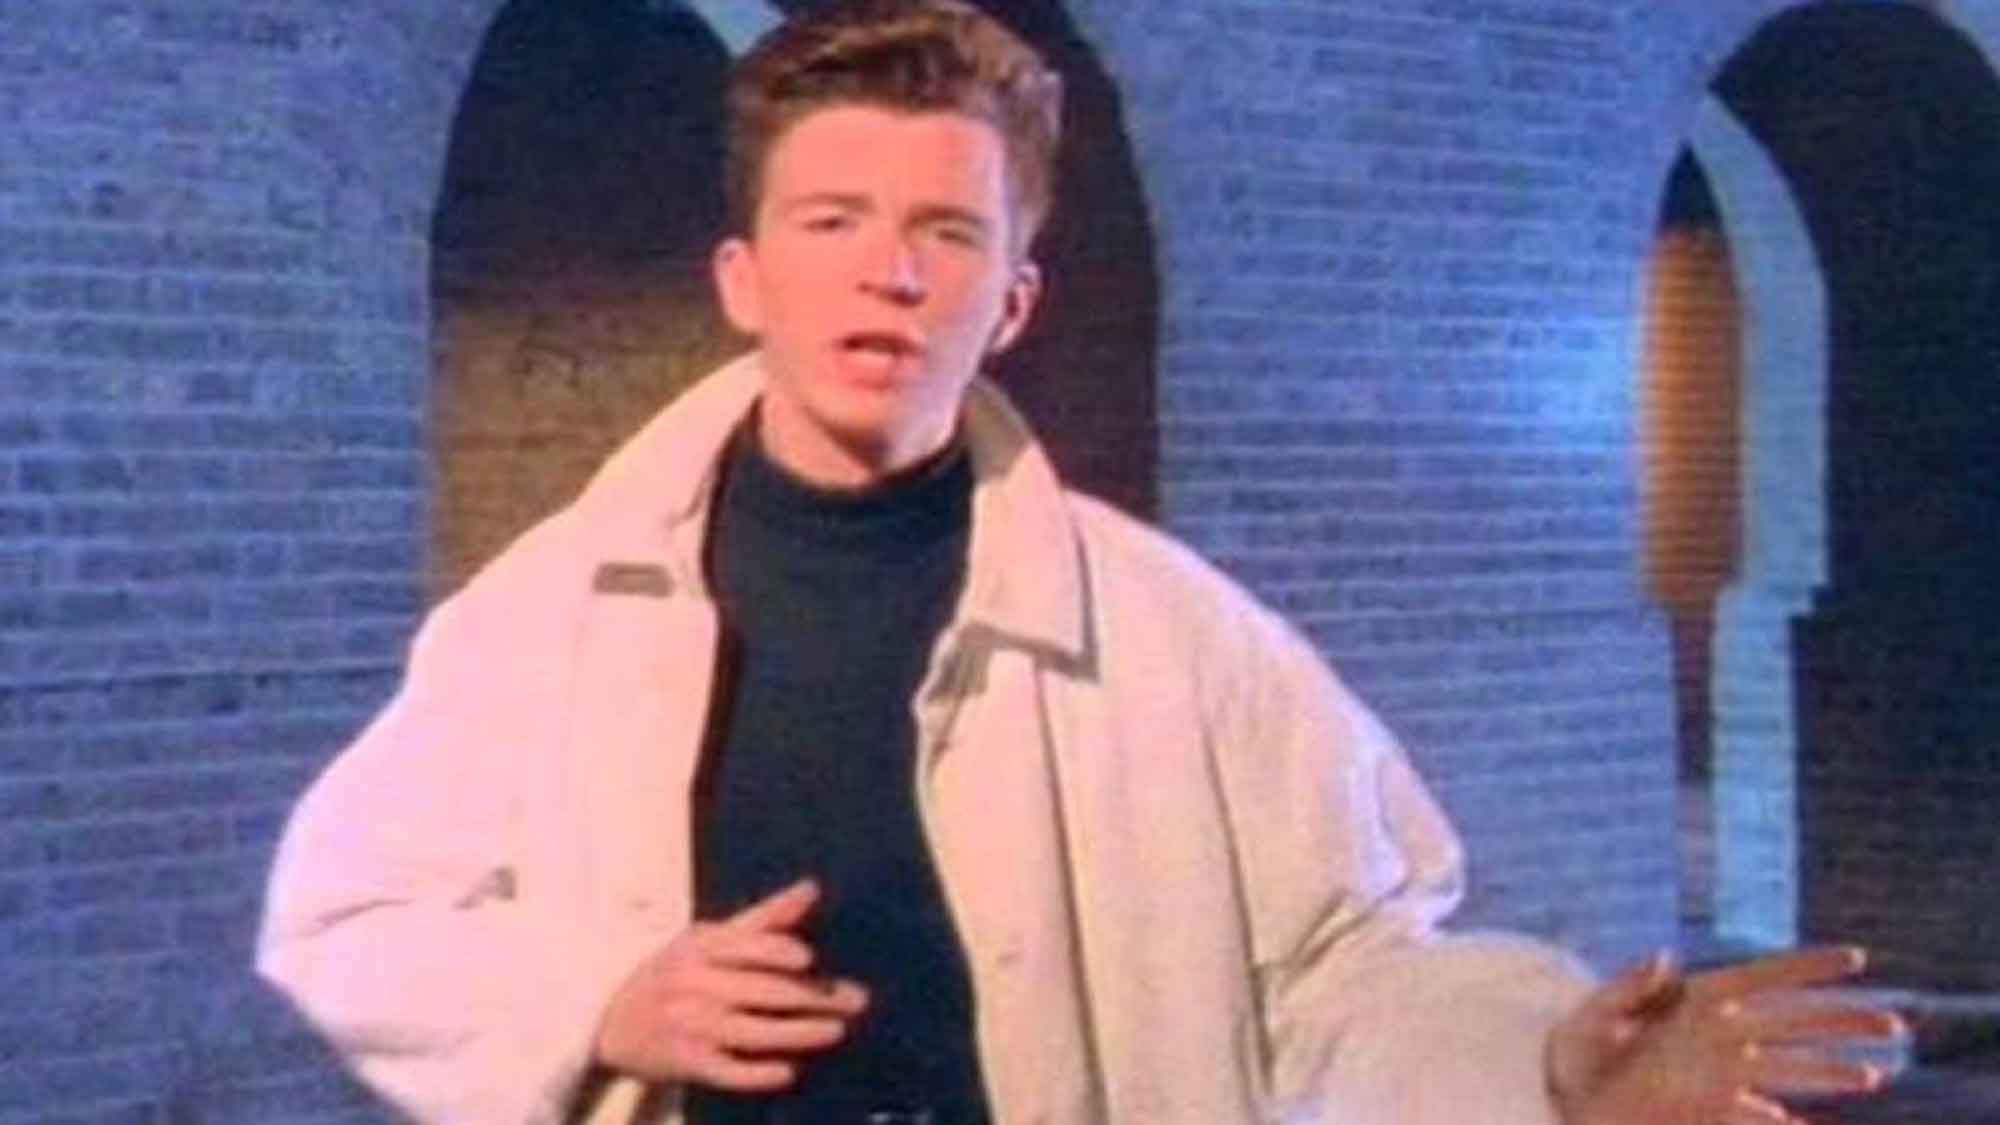 Have You Been Rickrolled Yet? - Rickrolling Prank Goes Viral Across The Internet